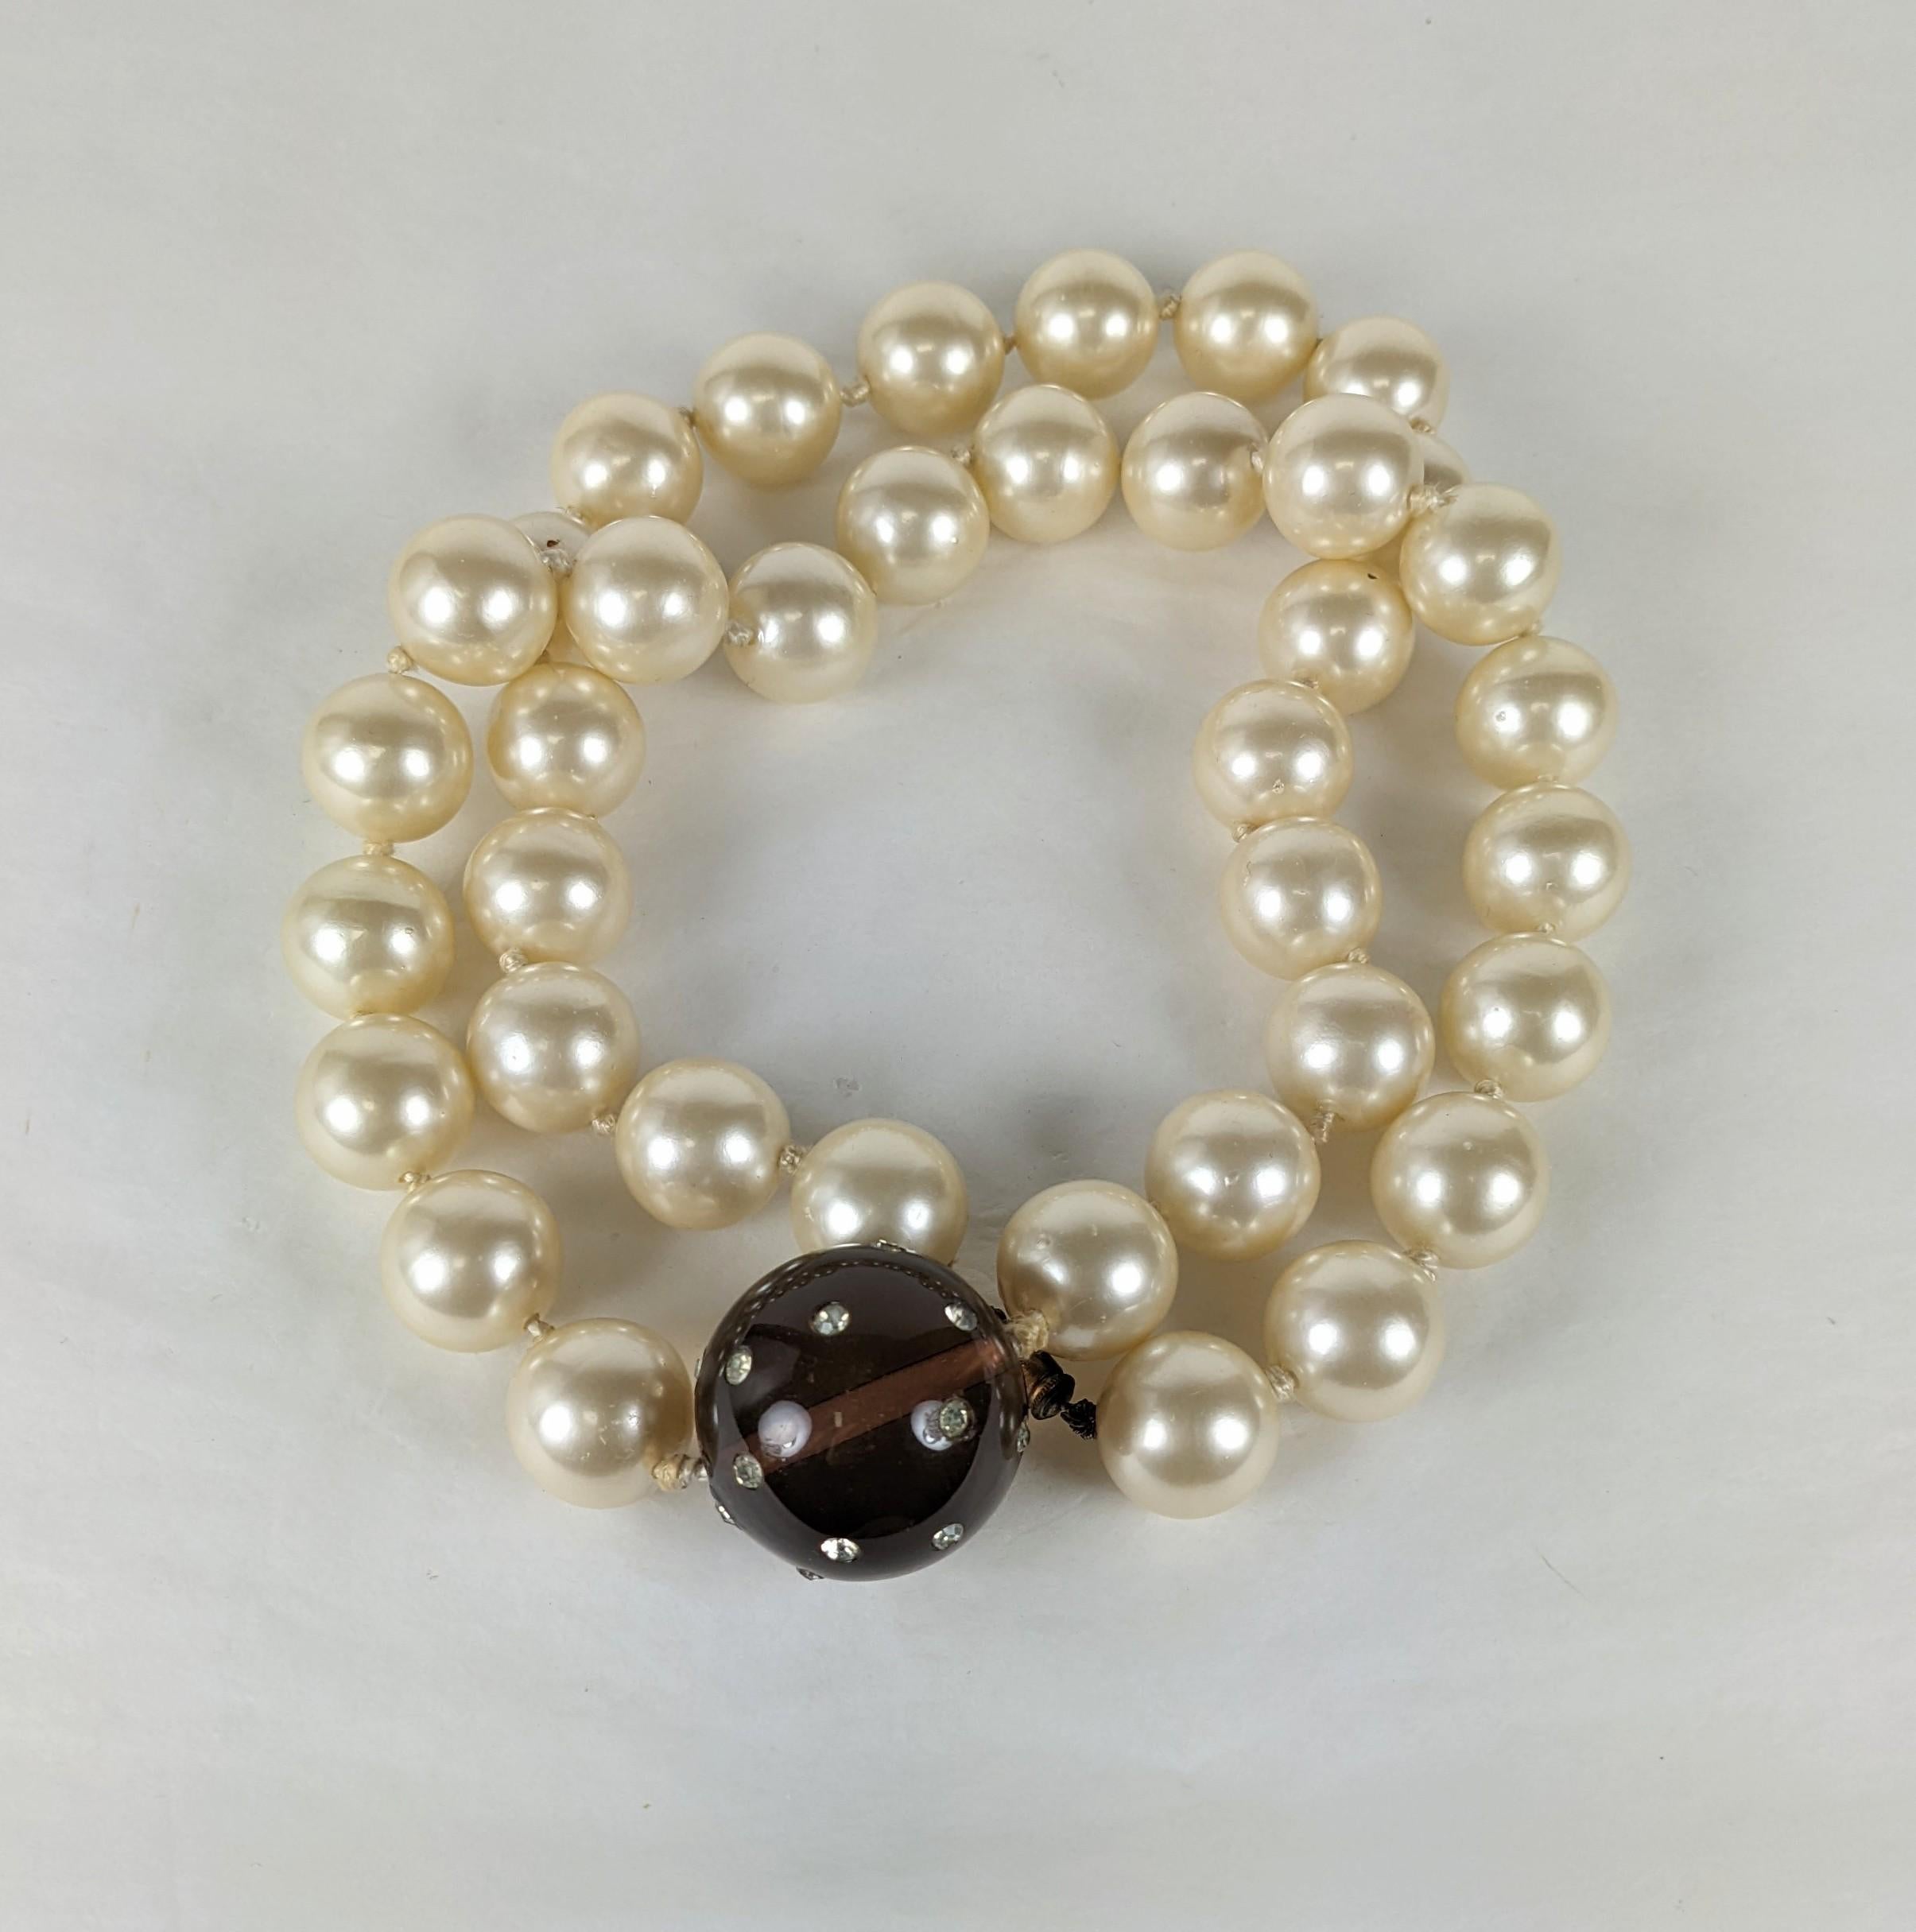 Hubert de Givenchy Haute Couture opera length necklace from the estate of Bunny Mellon. Composed of signature Maison Gripoix handmade  large faux pearls with a very large focal center smokey Gripoix handmade glass bead set with scattered crystal